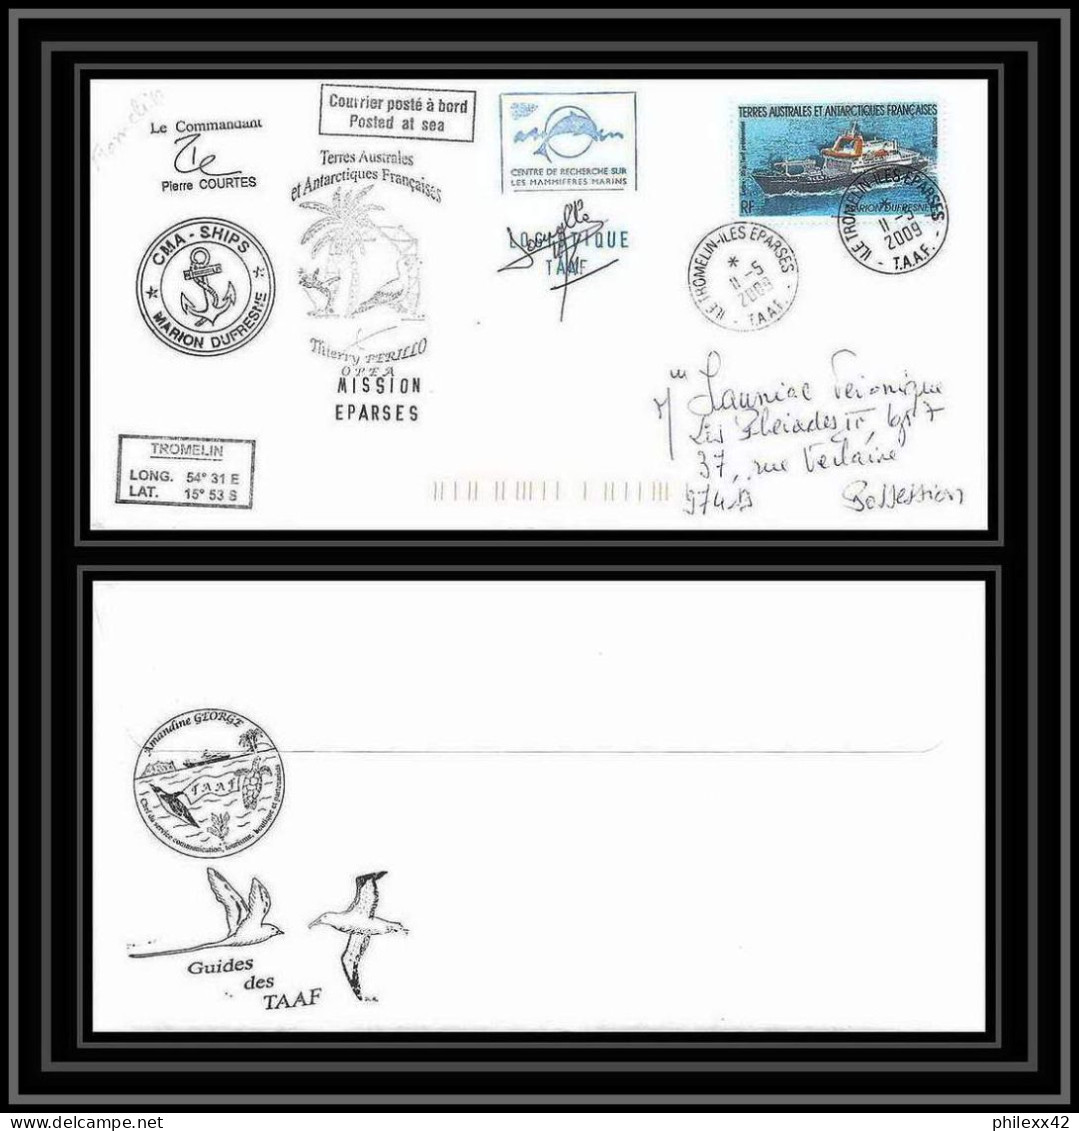 2912 Dufresne 2 Signé Signed Trommelin 11/5/2009 Mission Eparses N°520 ANTARCTIC Terres Australes (taaf) Lettre Cover - Lettres & Documents